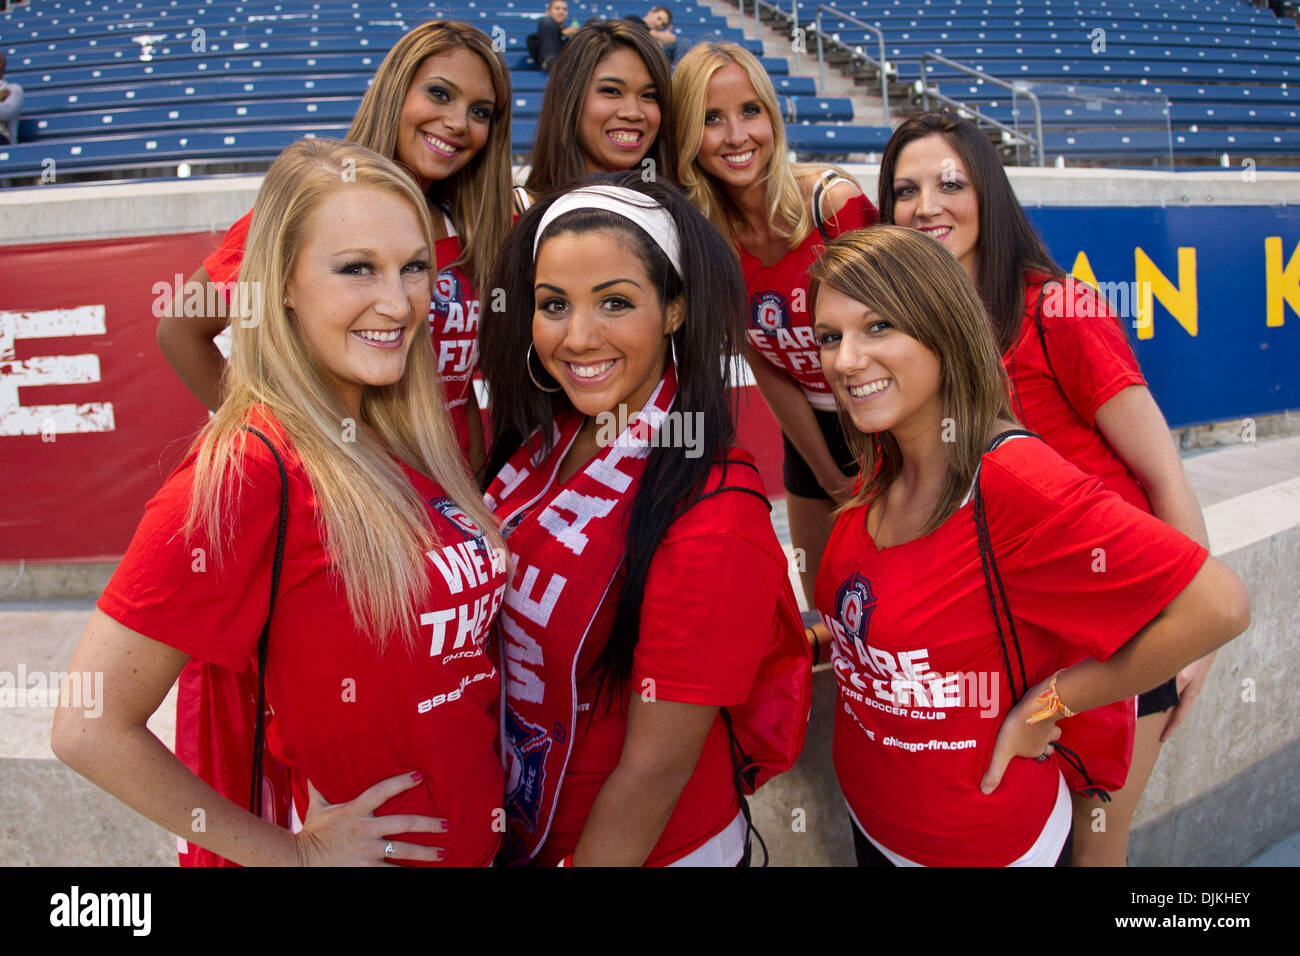 Sept. 8, 2010 - Bridgeview, Illinois, United States of America - Chicago Fire cheerleaders before the start of the MLS game between the Chicago Fire and Toronto FC at Toyota Park in Bridgeview, IL. The Fire and Toronto FC played to a 0-0 tie. (Credit Image: © Geoffrey Siehr/Southcreek Global/ZUMApress.com) Stock Photo